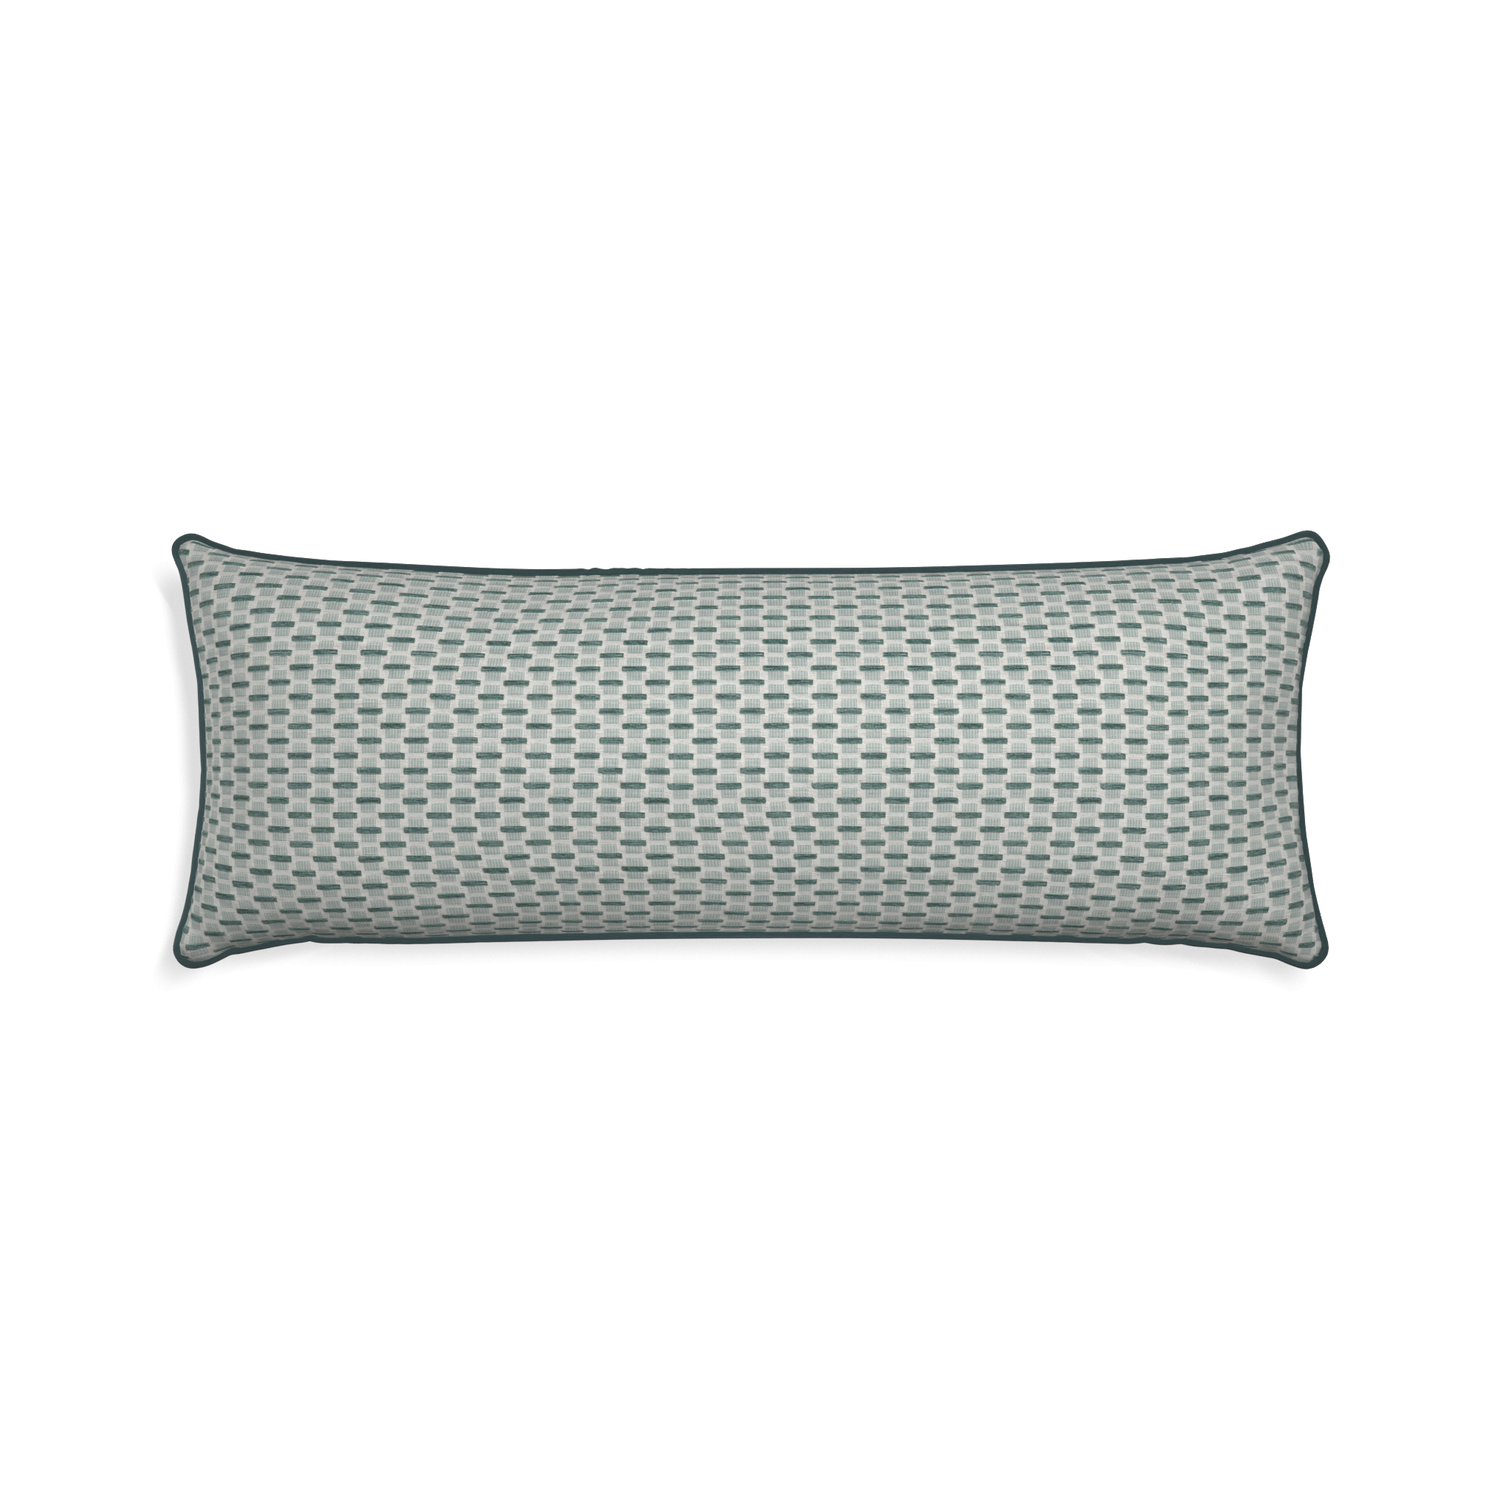 Xl-lumbar willow mint custom green geometric chenillepillow with p piping on white background